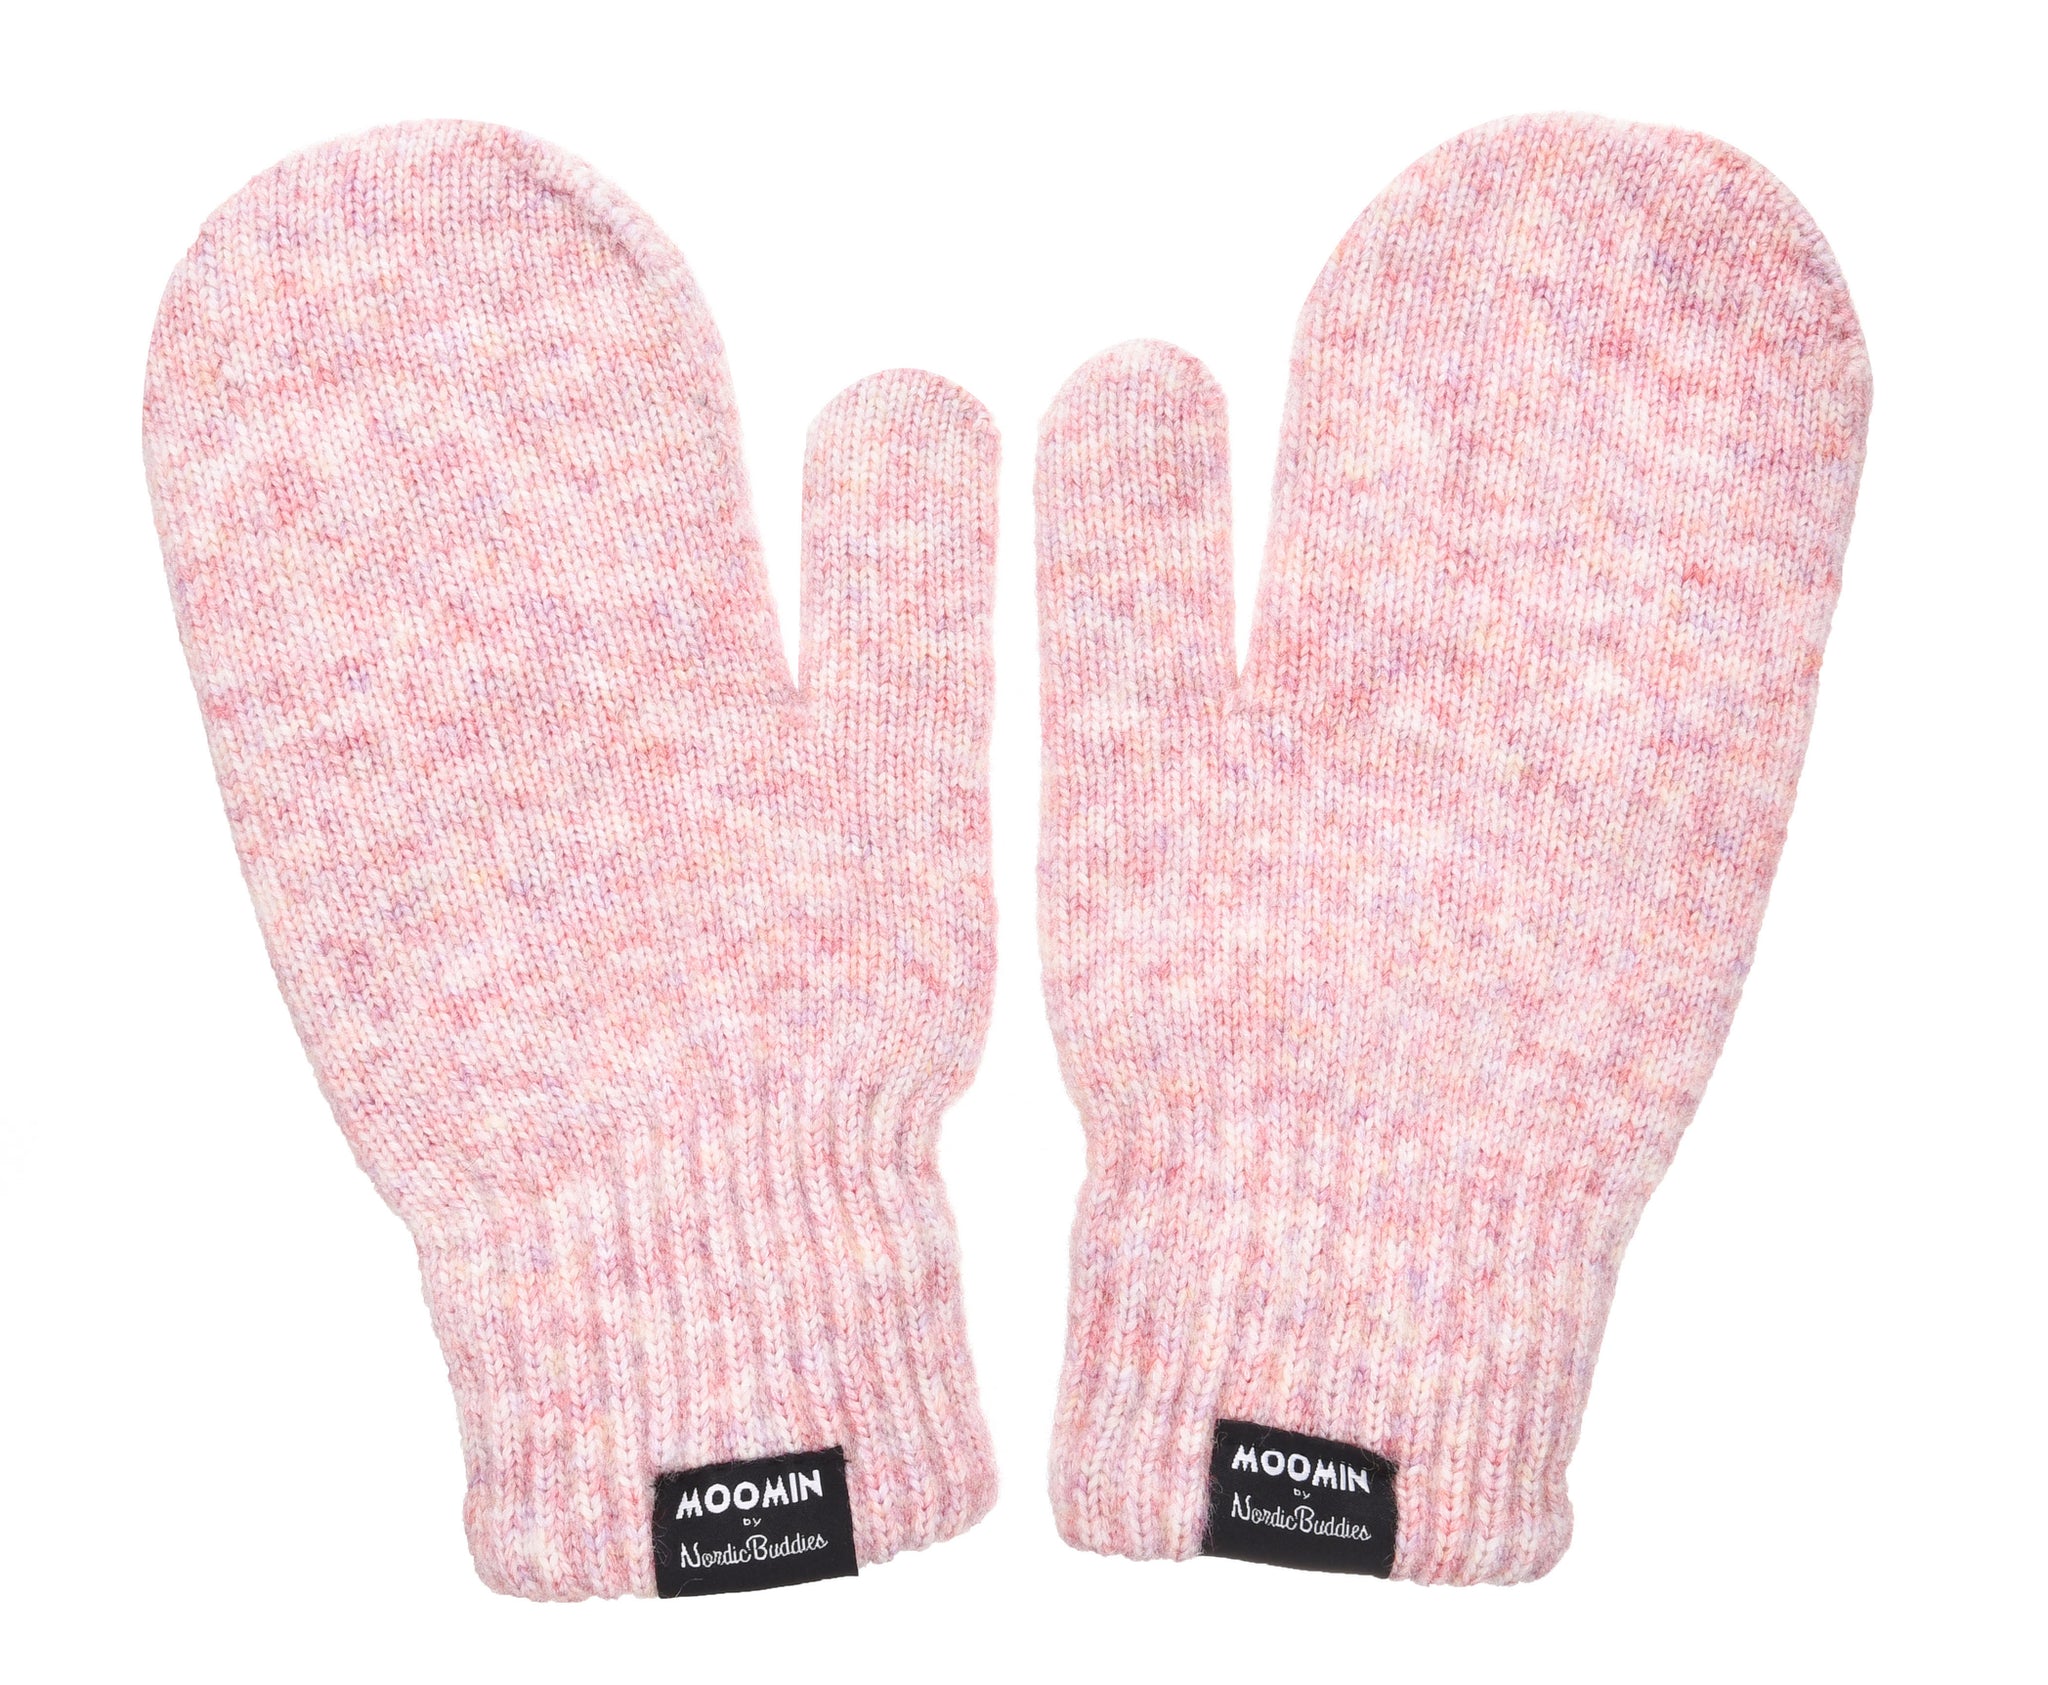 Little My Mittens Adult - Pink